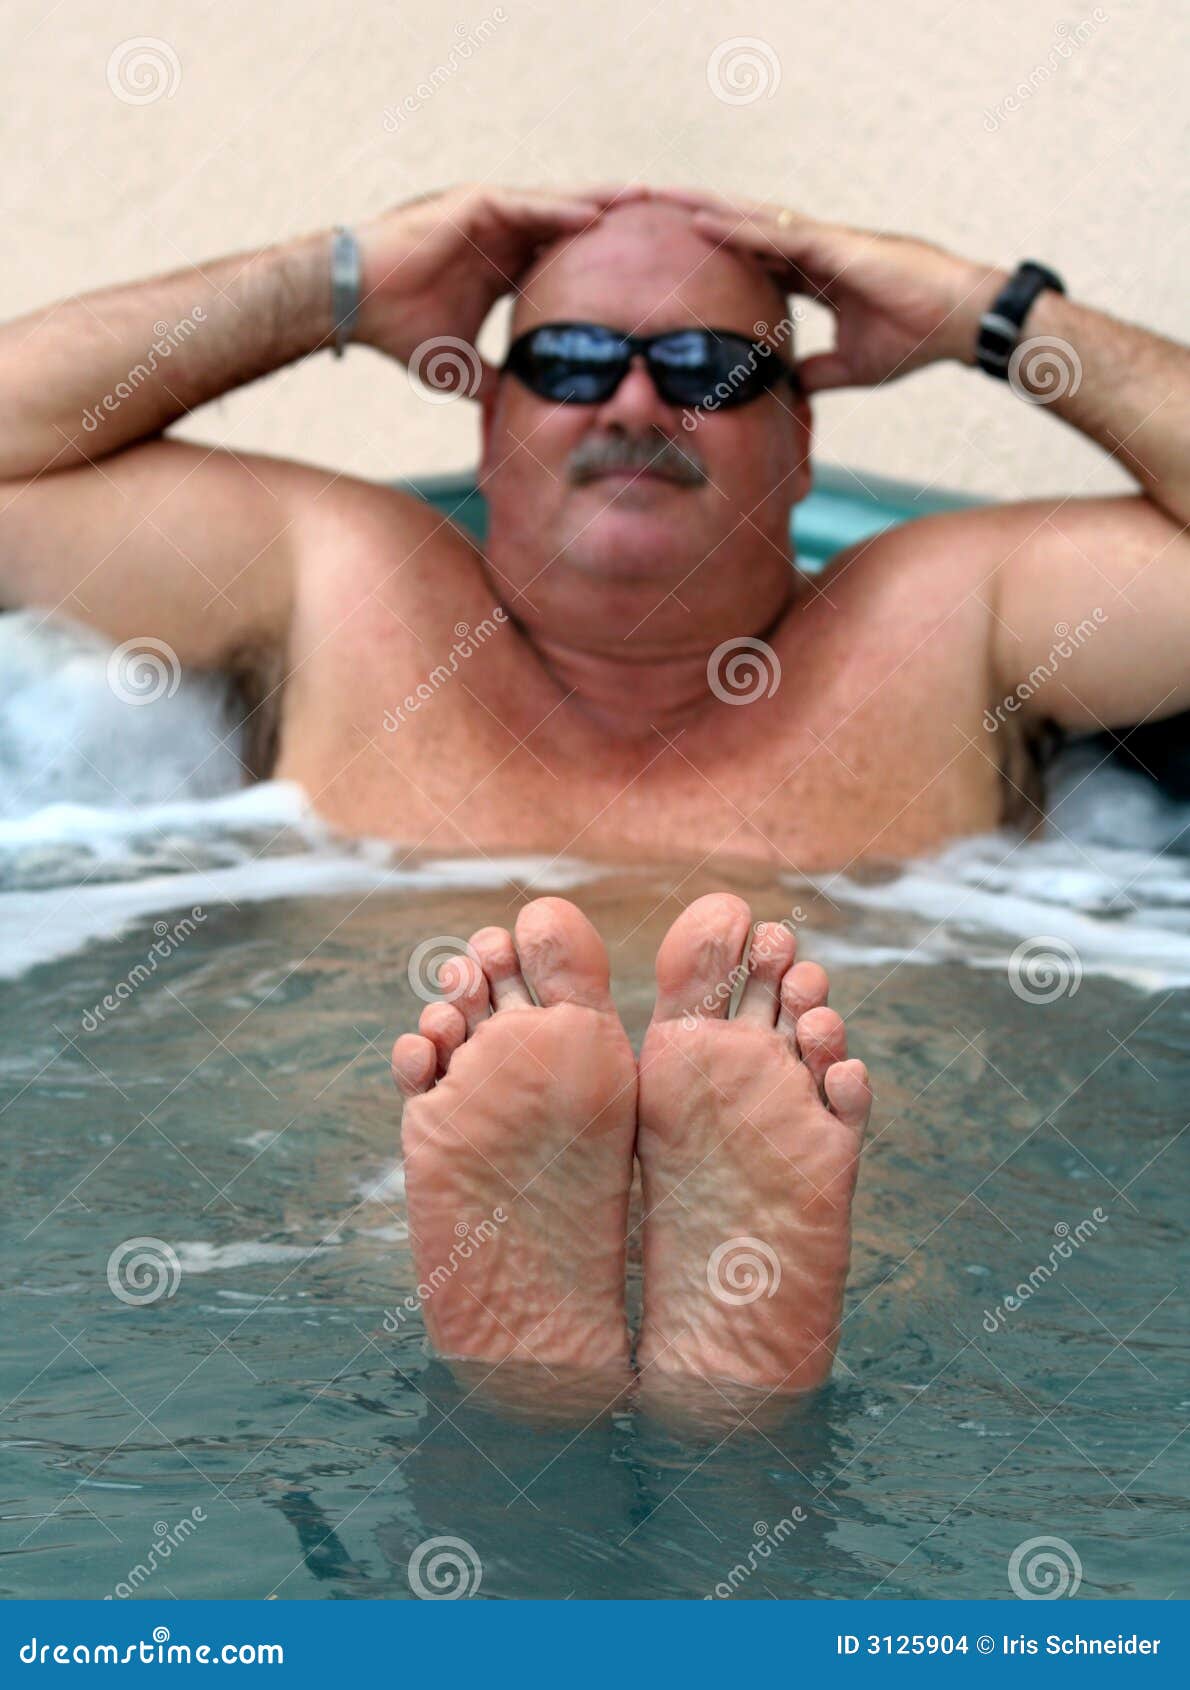 Feet Up In The Tub Stock Photo Im